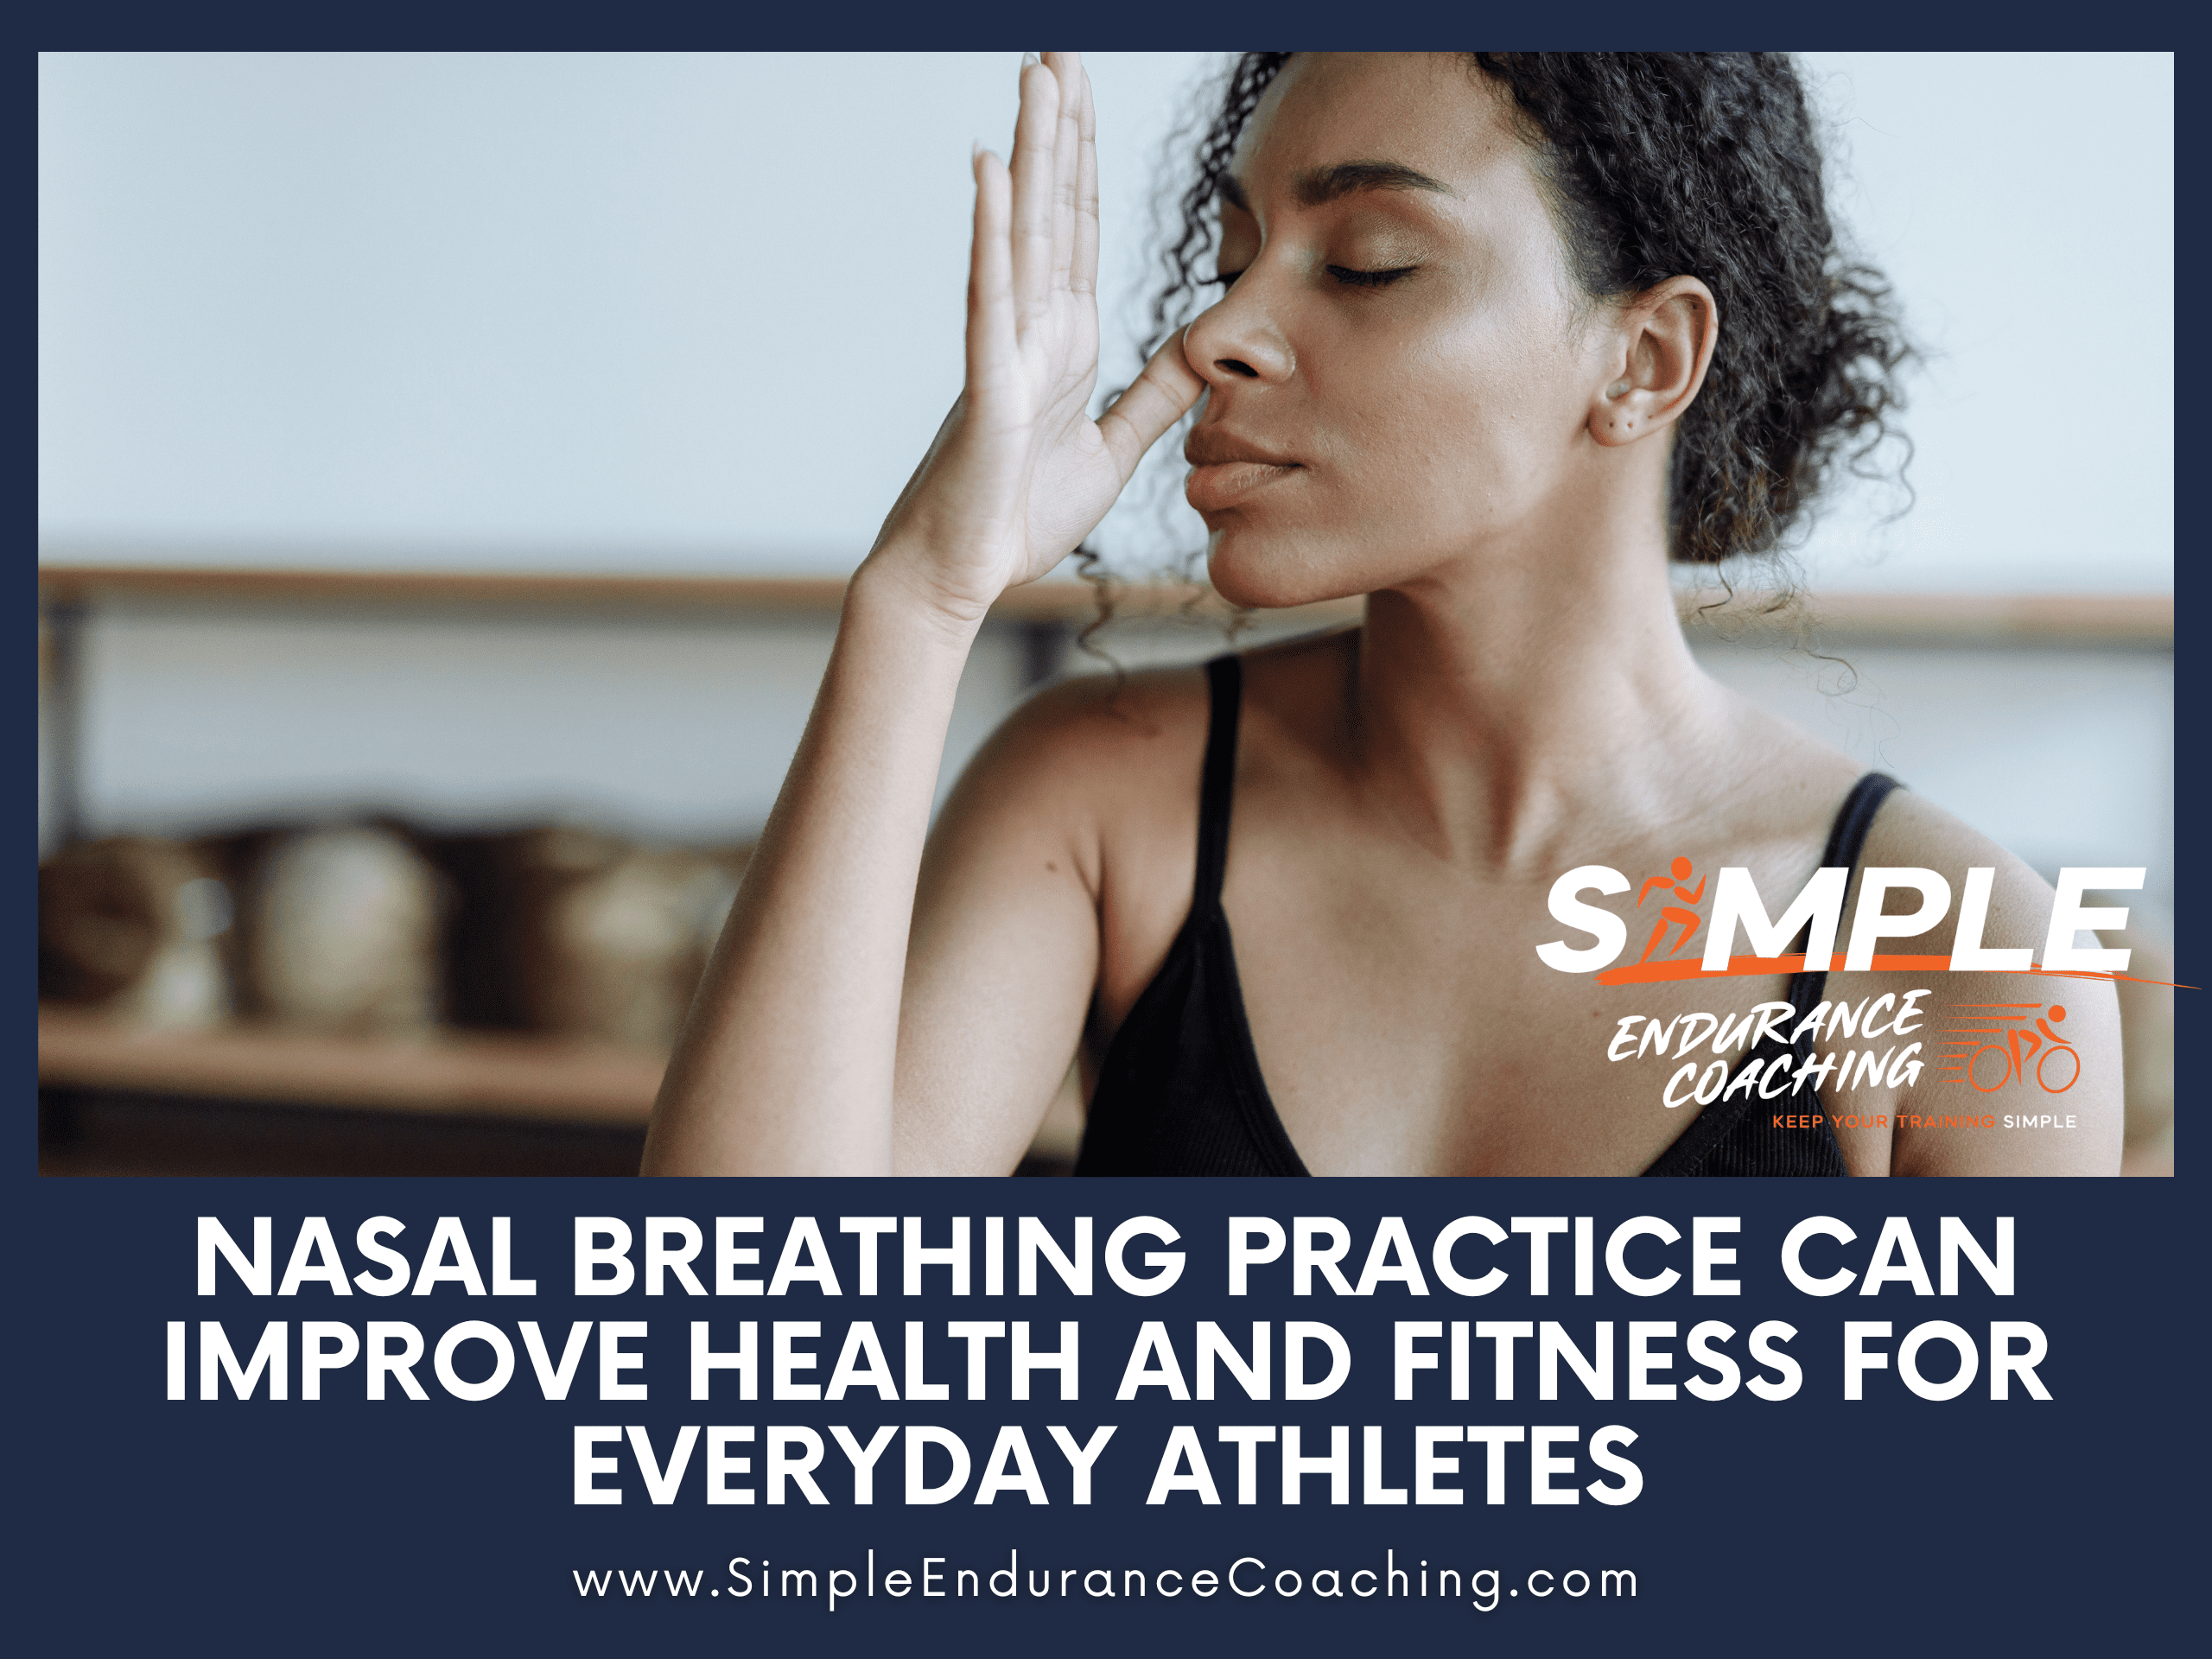 Discover the power of nasal breathing for improved health and fitness. Incorporate this practice into your everyday workouts to breathe better, perform better with nasal breathing!